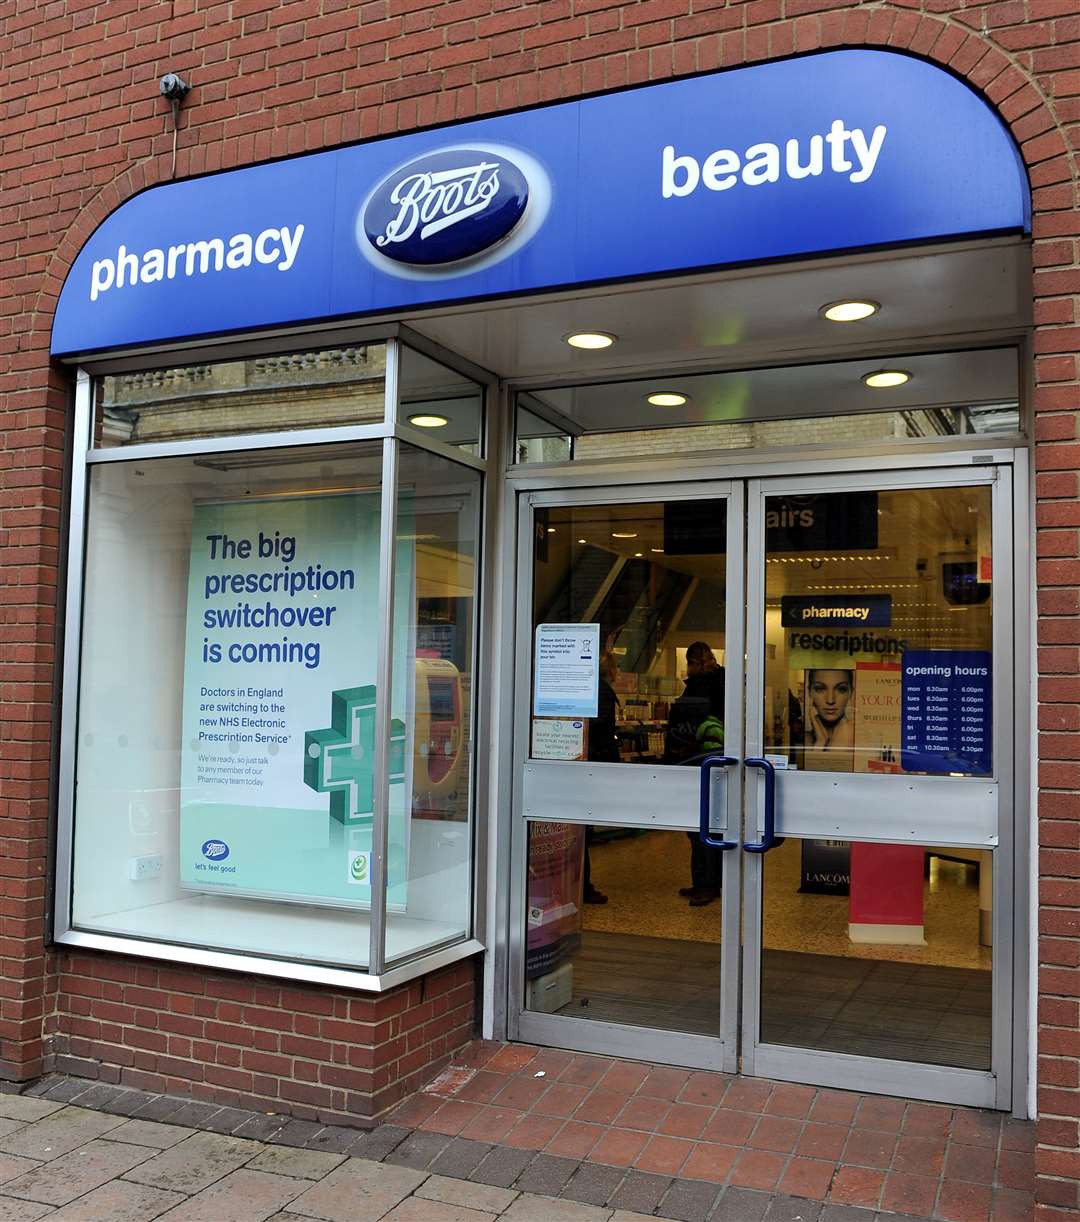 Boots brought forward its NHS flu jab service for the over 65's